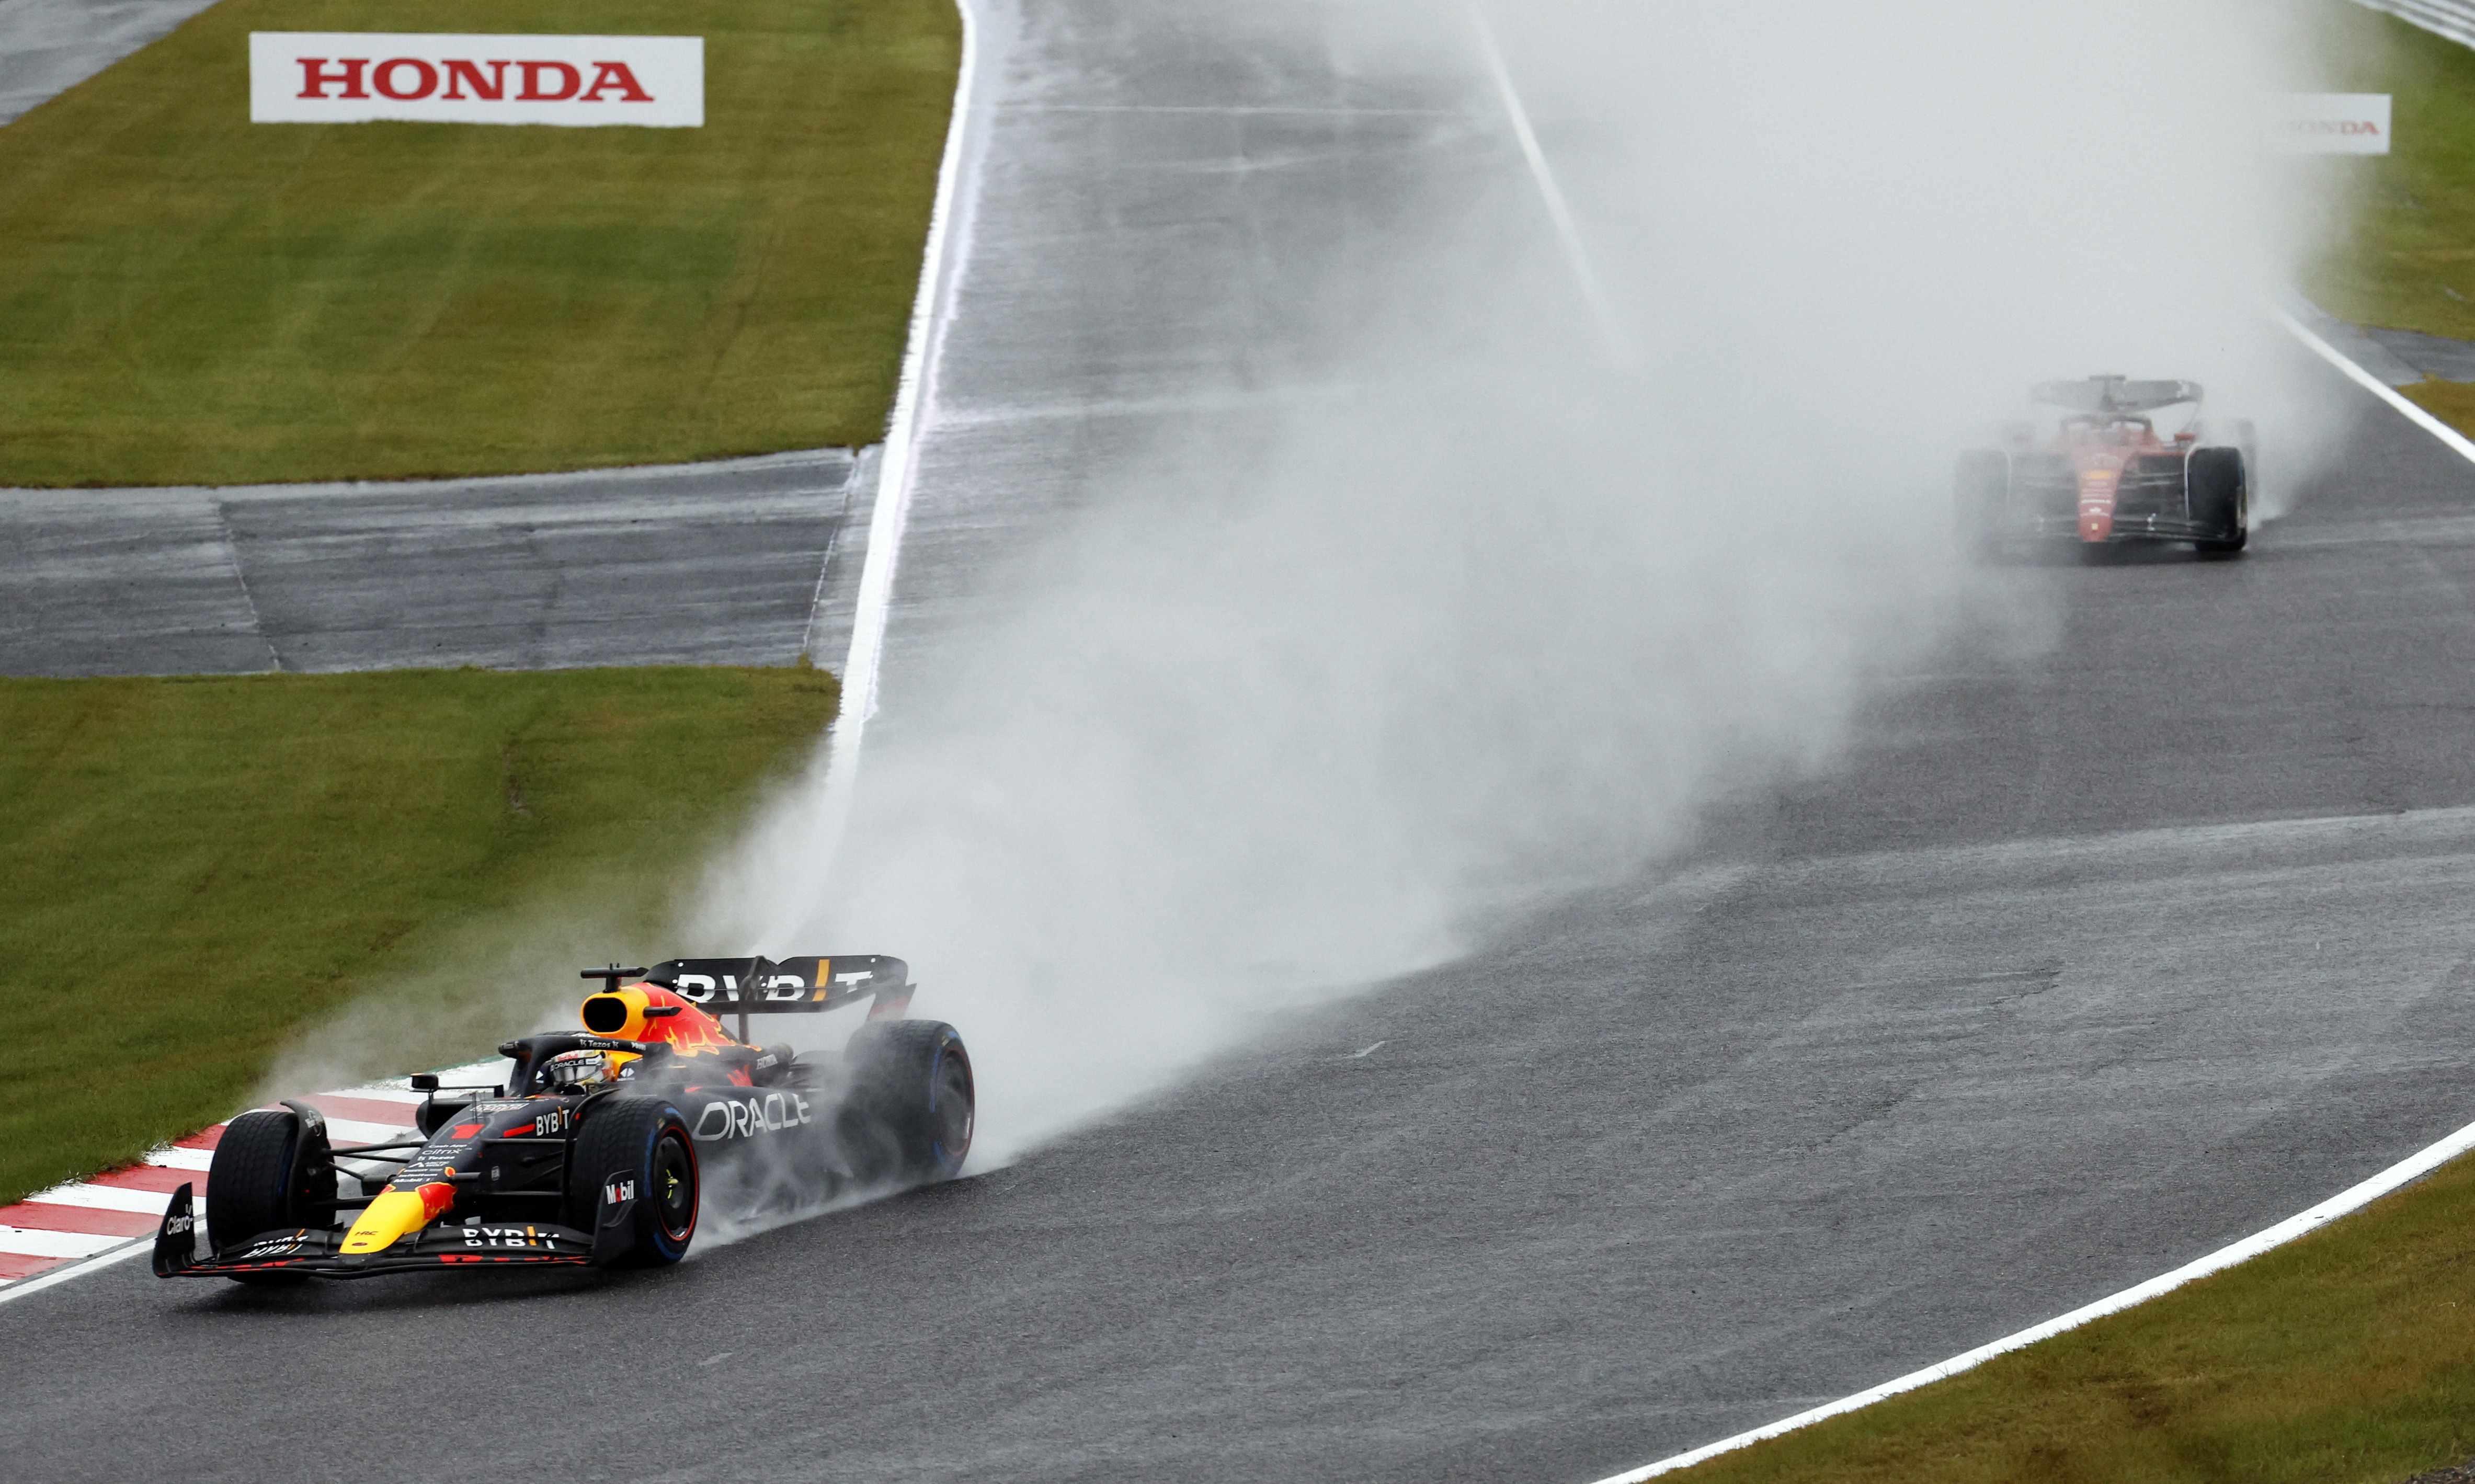 , ‘Wtf. How’s this happened!?’ – Gasly narrowly avoids crash with TRACTOR with fury over chaotic F1 race in Japan